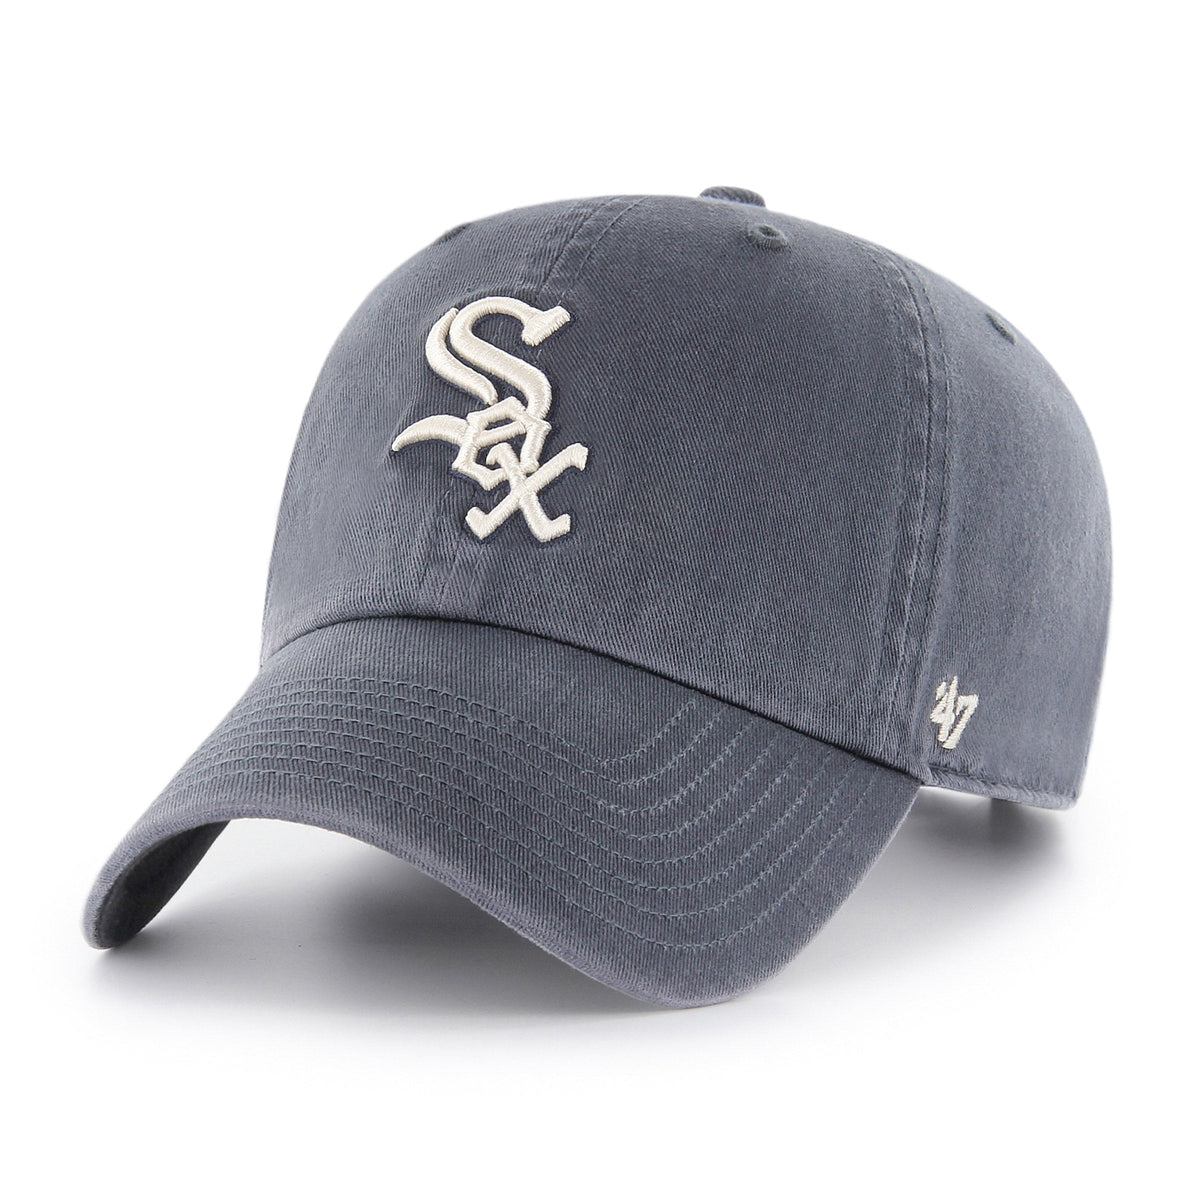 CHICAGO WHITE SOX '47 CLEAN UP